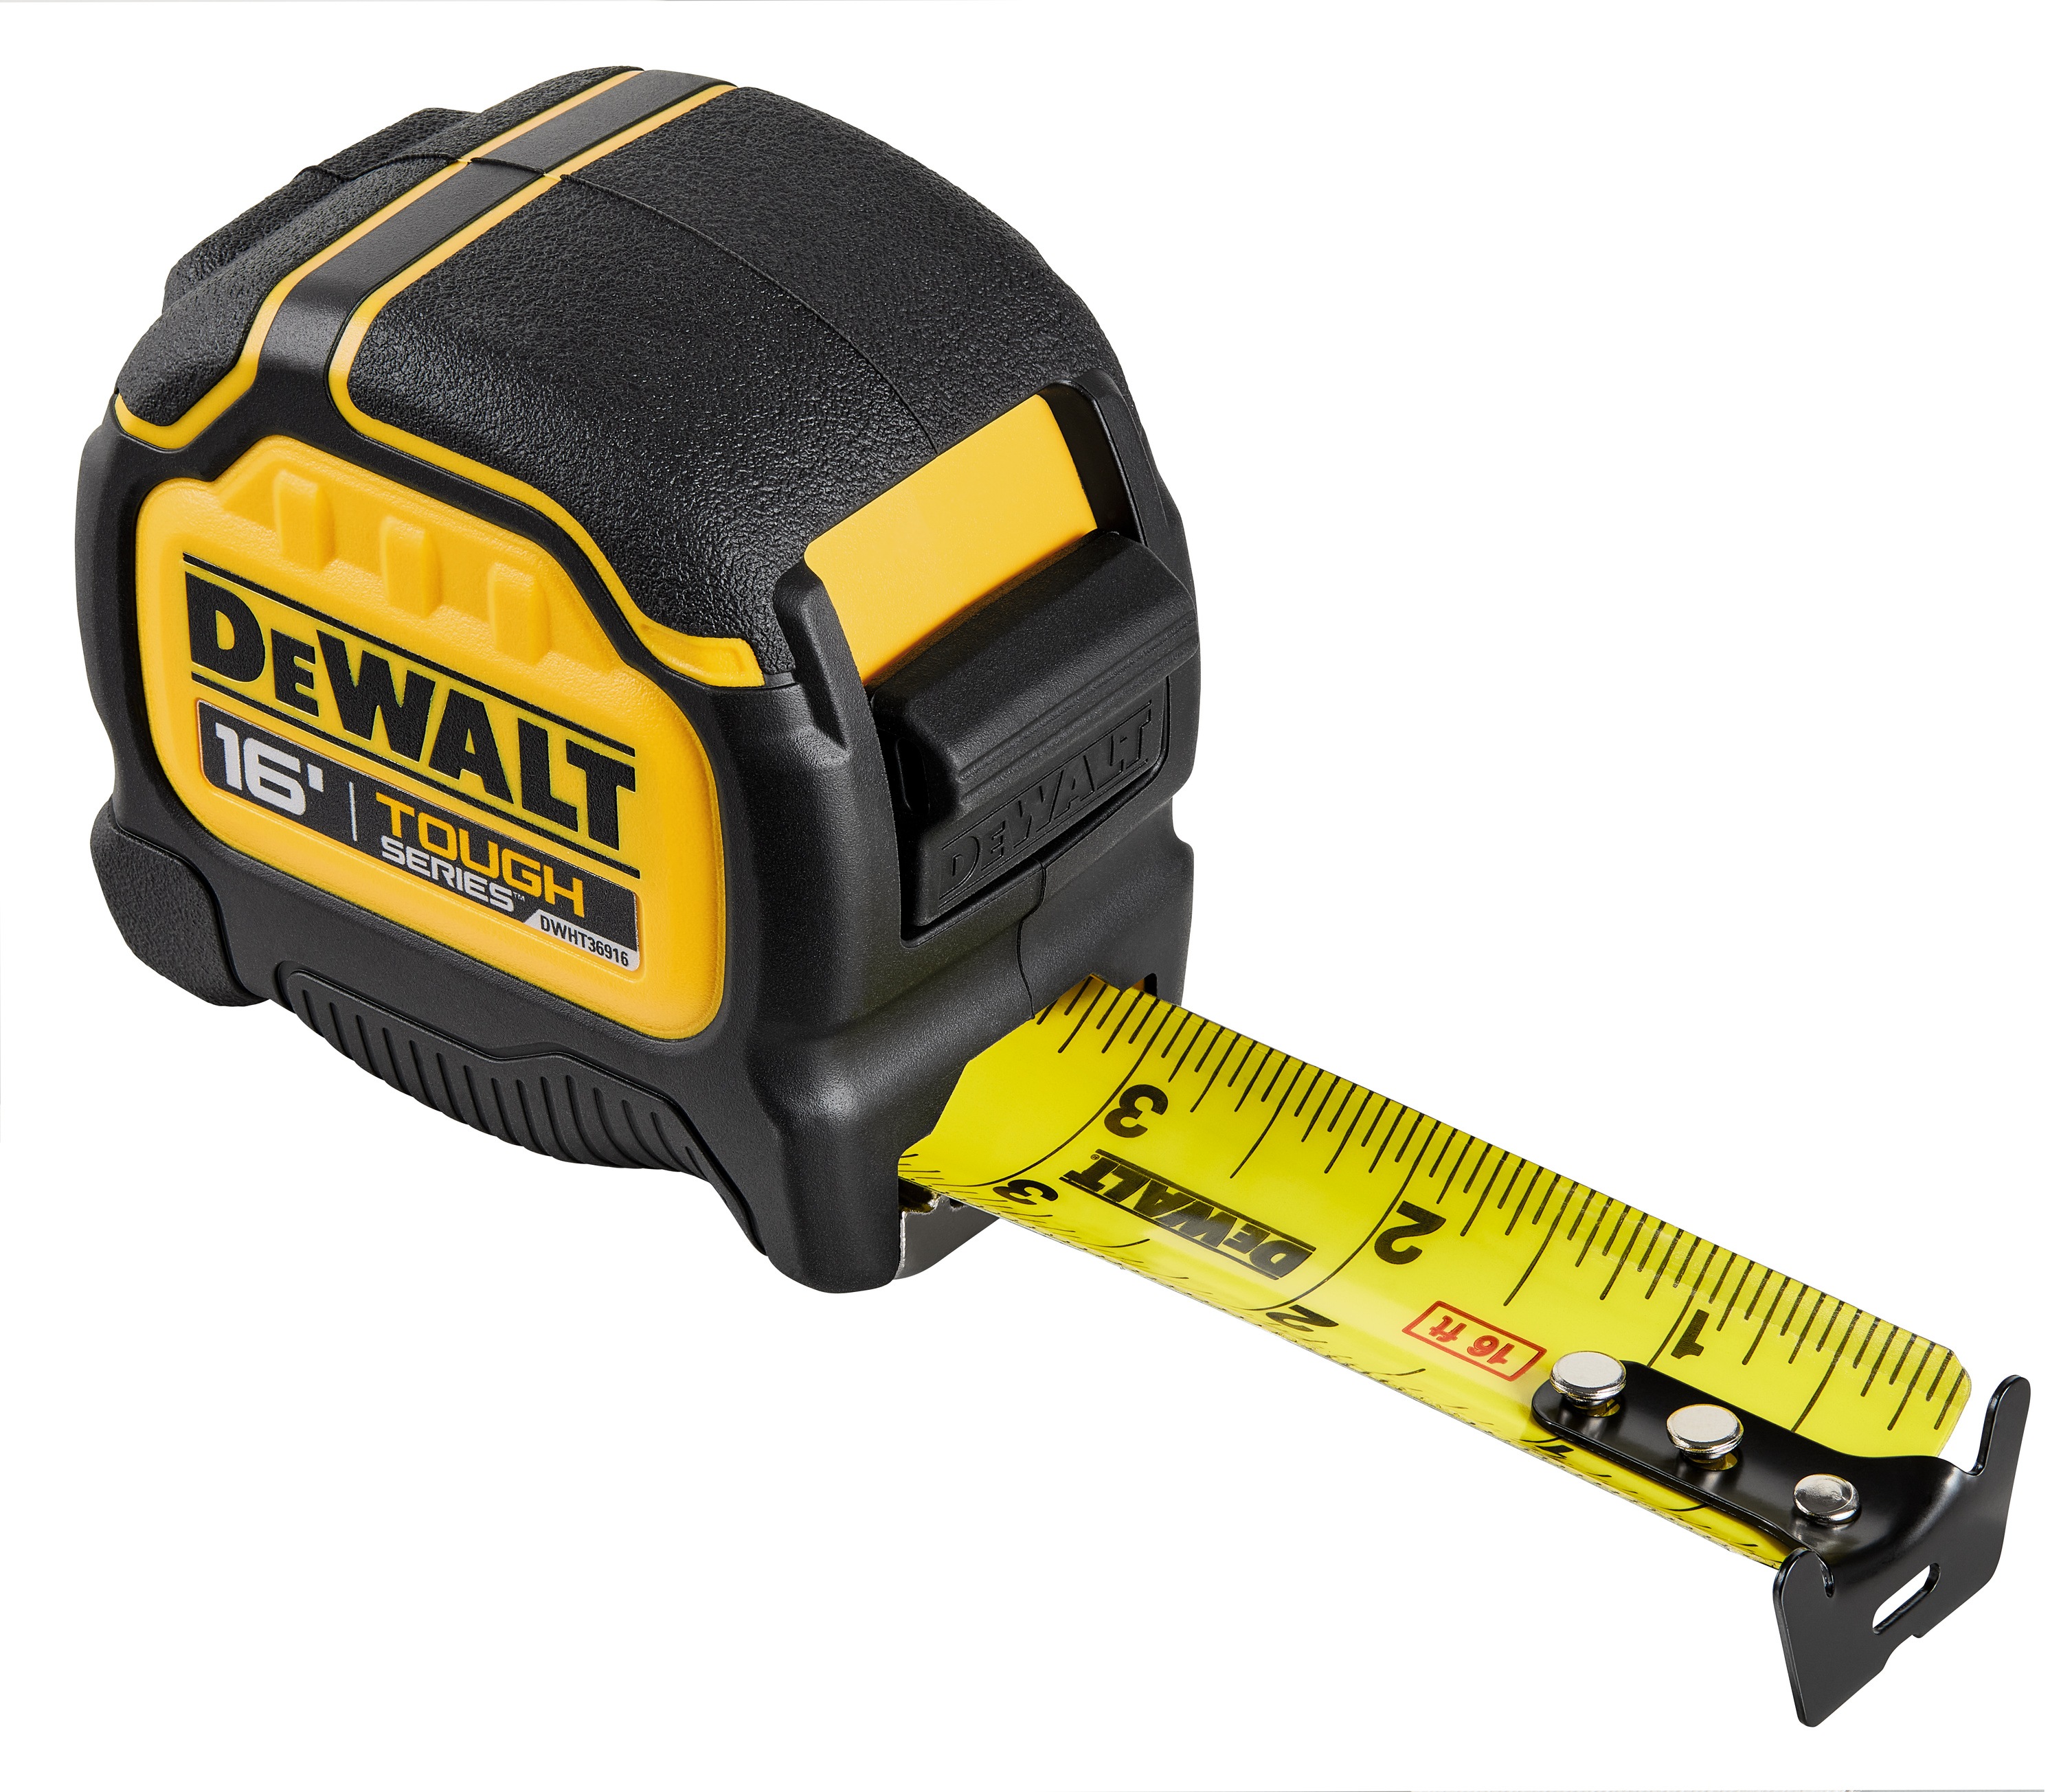 Profile of Tough Series 16 feet Tape Measure with blade pulled out and hook magnet removed. 